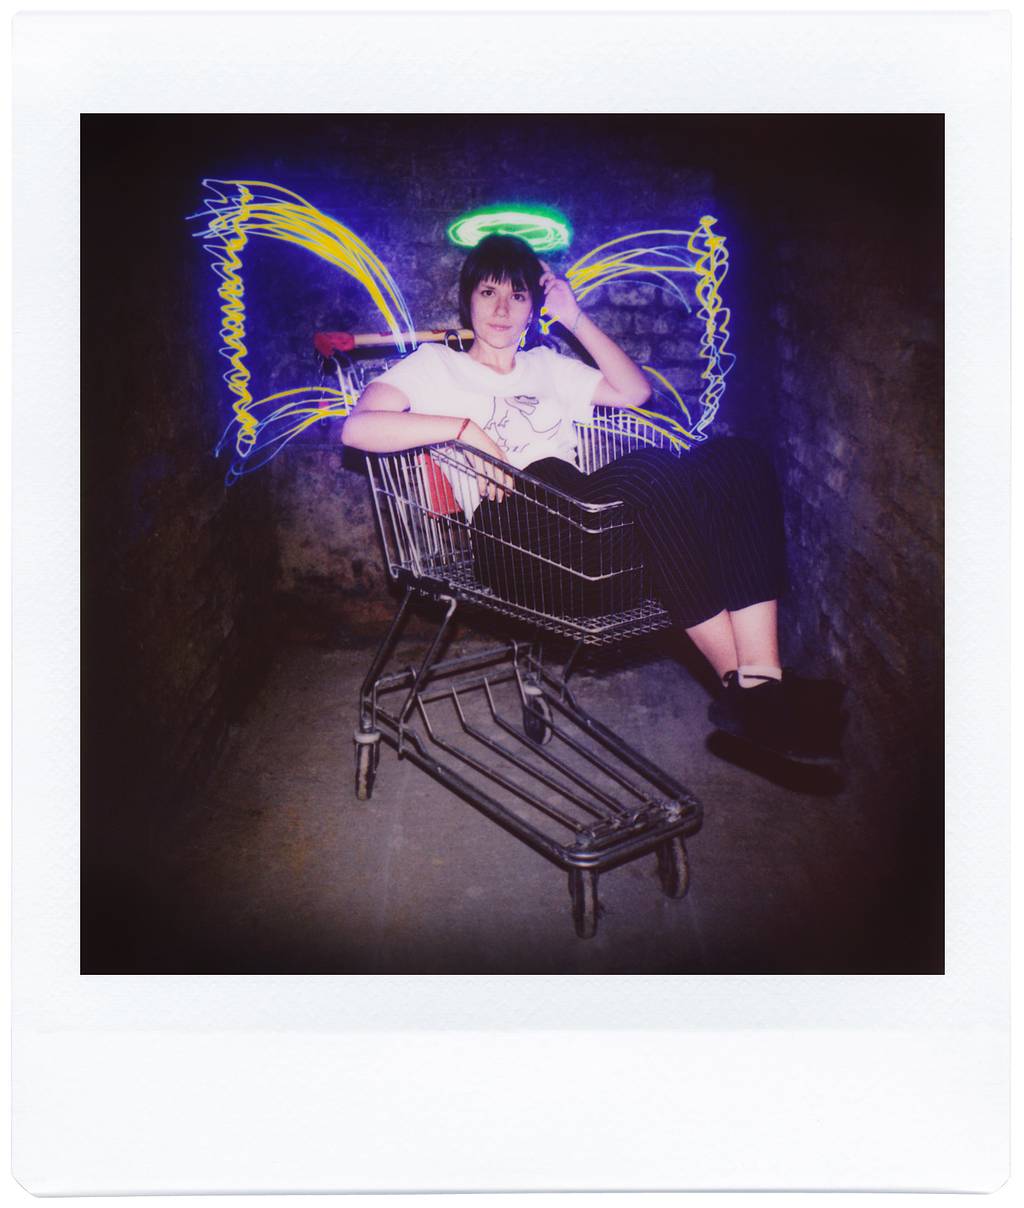 Awesome Light Painting Shots with the Diana Instant Square!